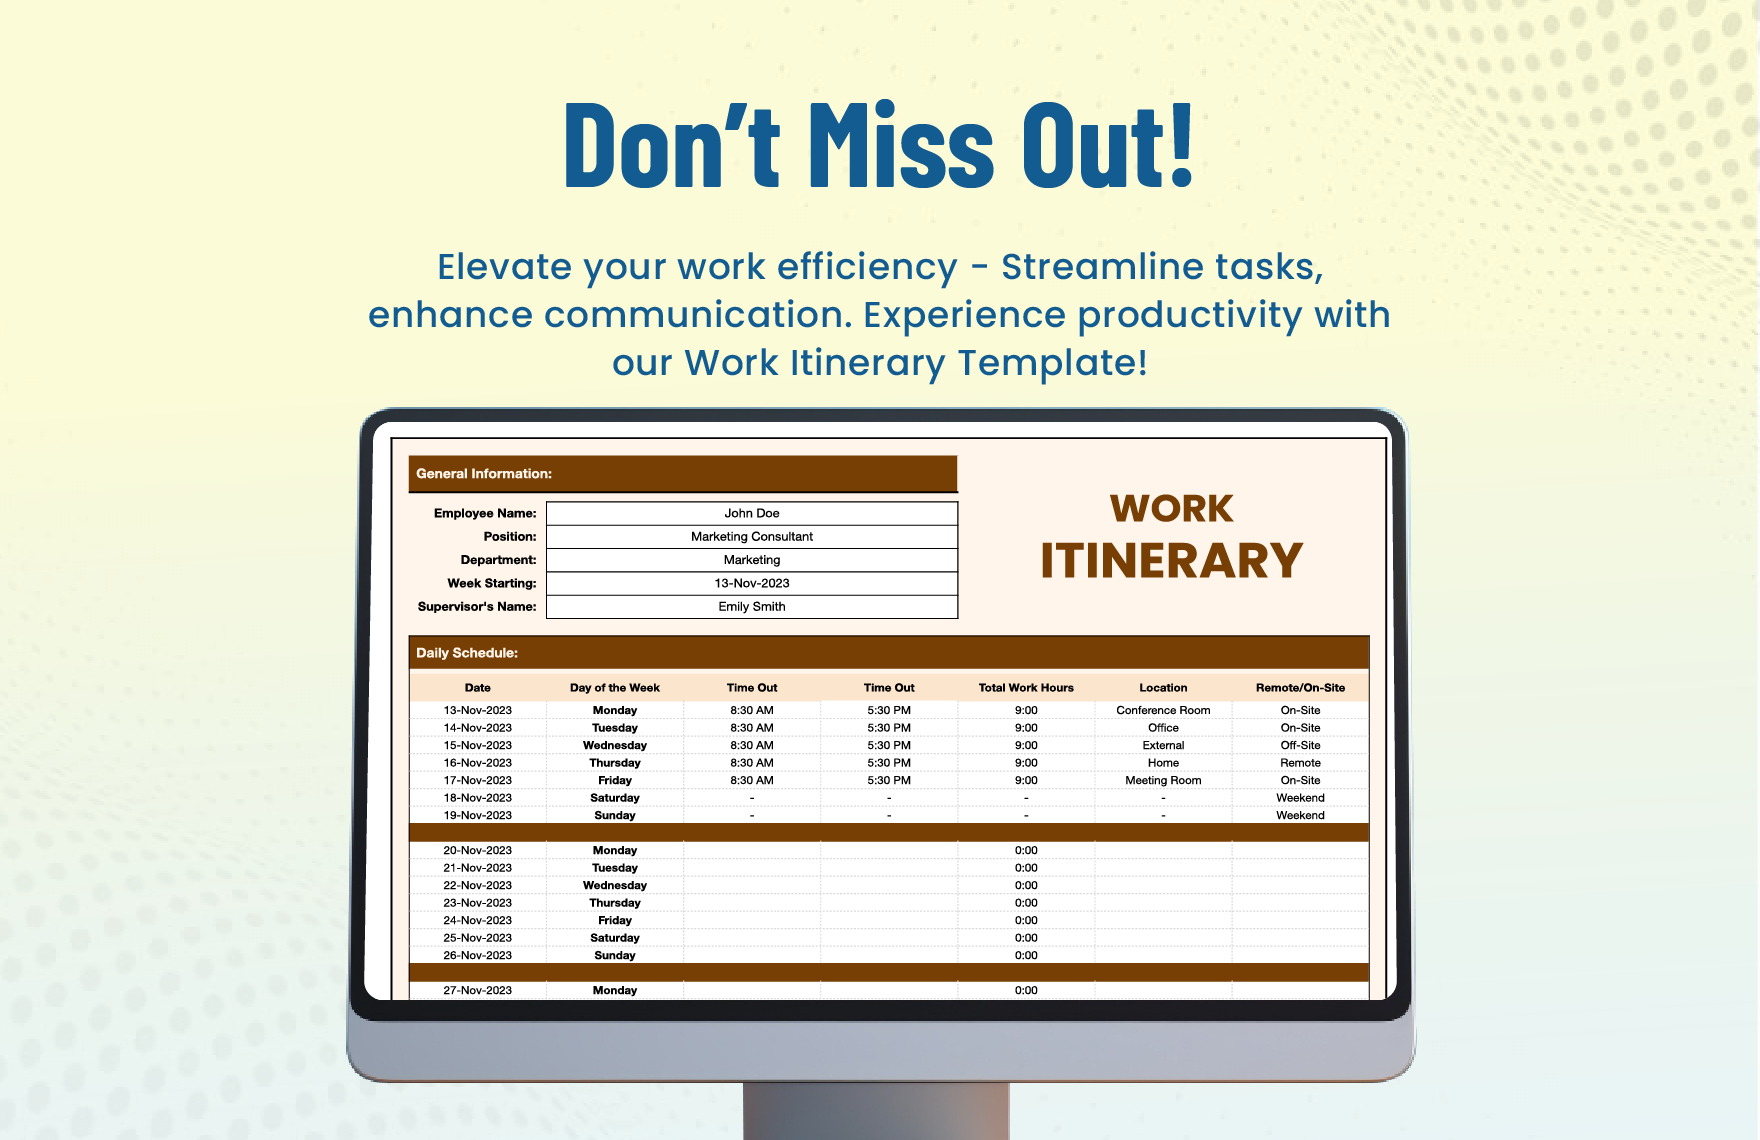 Work Itinerary Template